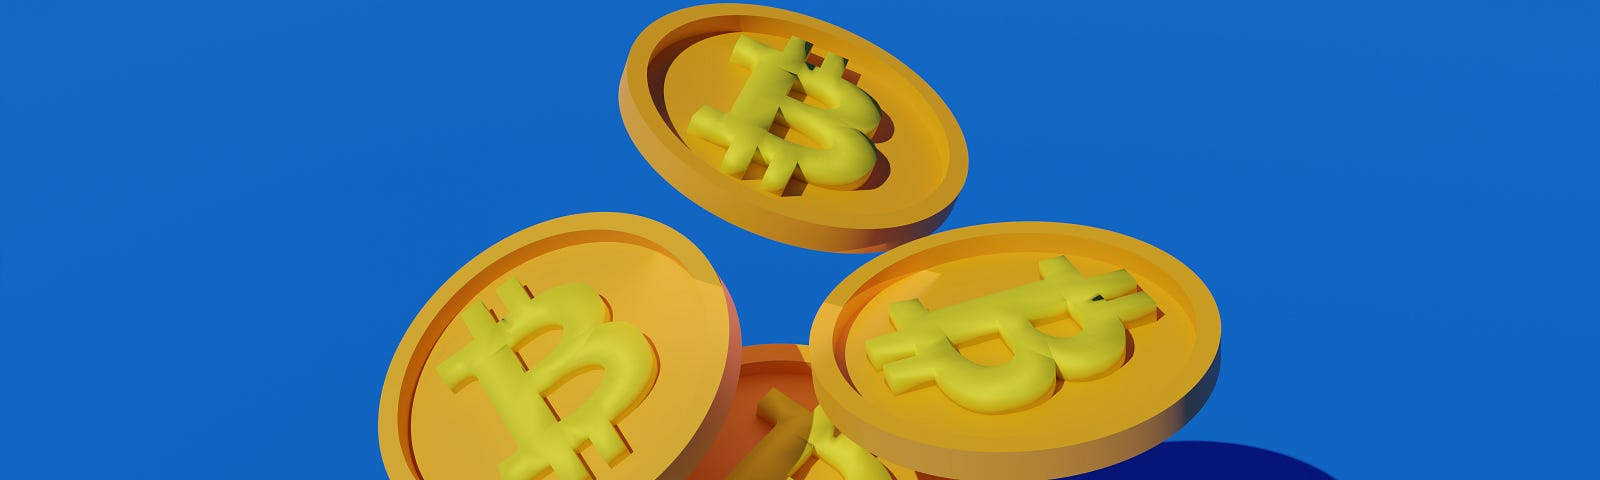 Cartoon graphic of bitcoin — 4 bright gold coins on a bold blue background